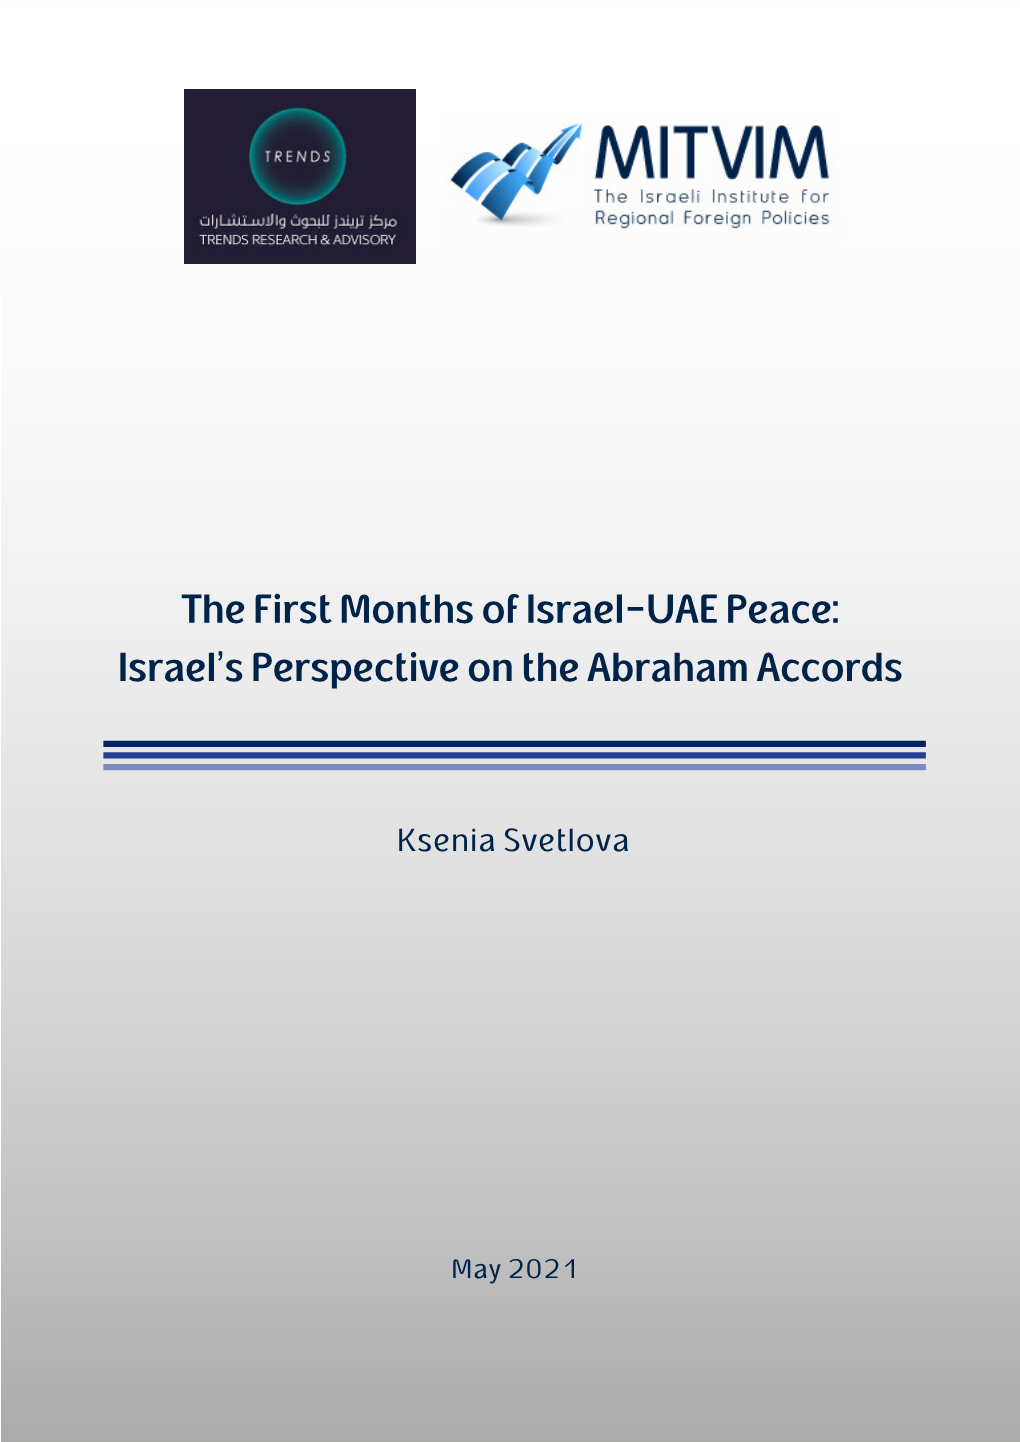 The First Months of Israel-UAE Peace: Israel's Perspective on the Abraham